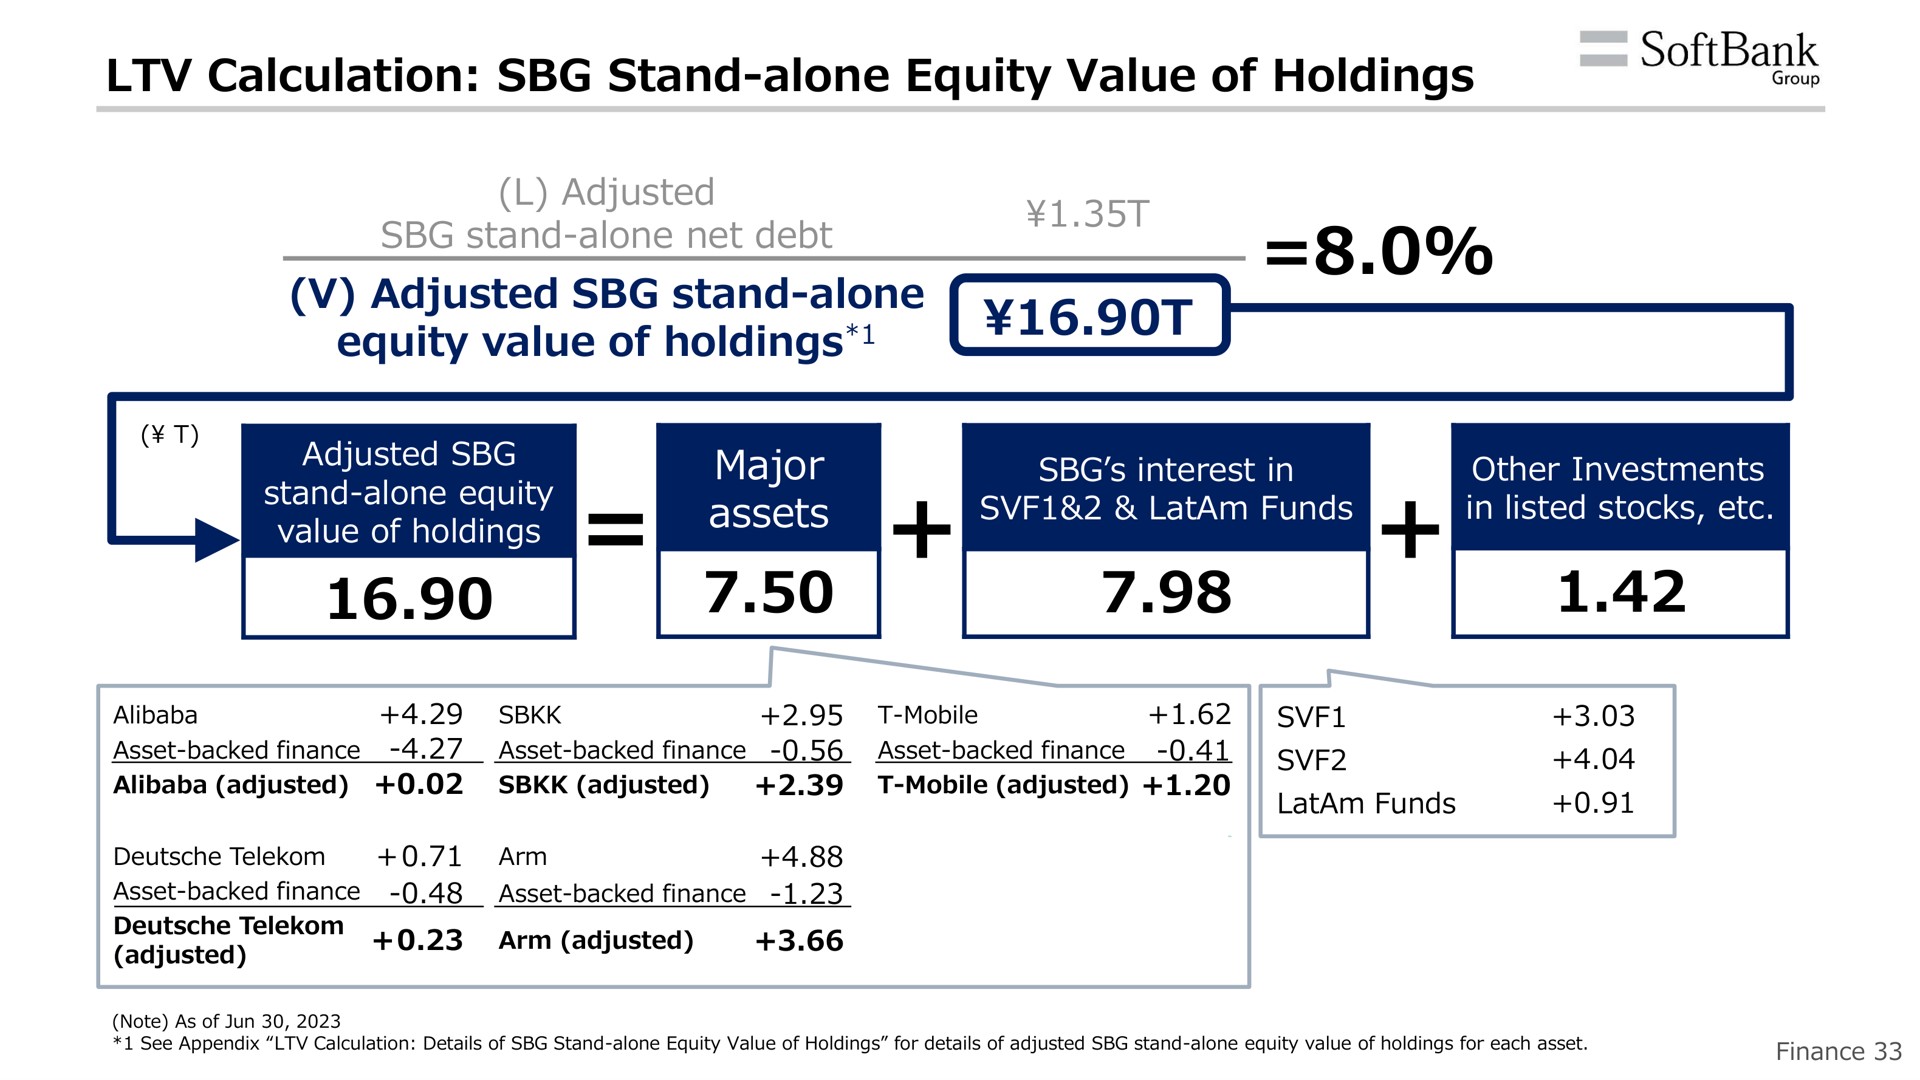 calculation stand alone equity value of holdings adjusted stand alone equity value of holdings major assets interest in other investments | SoftBank